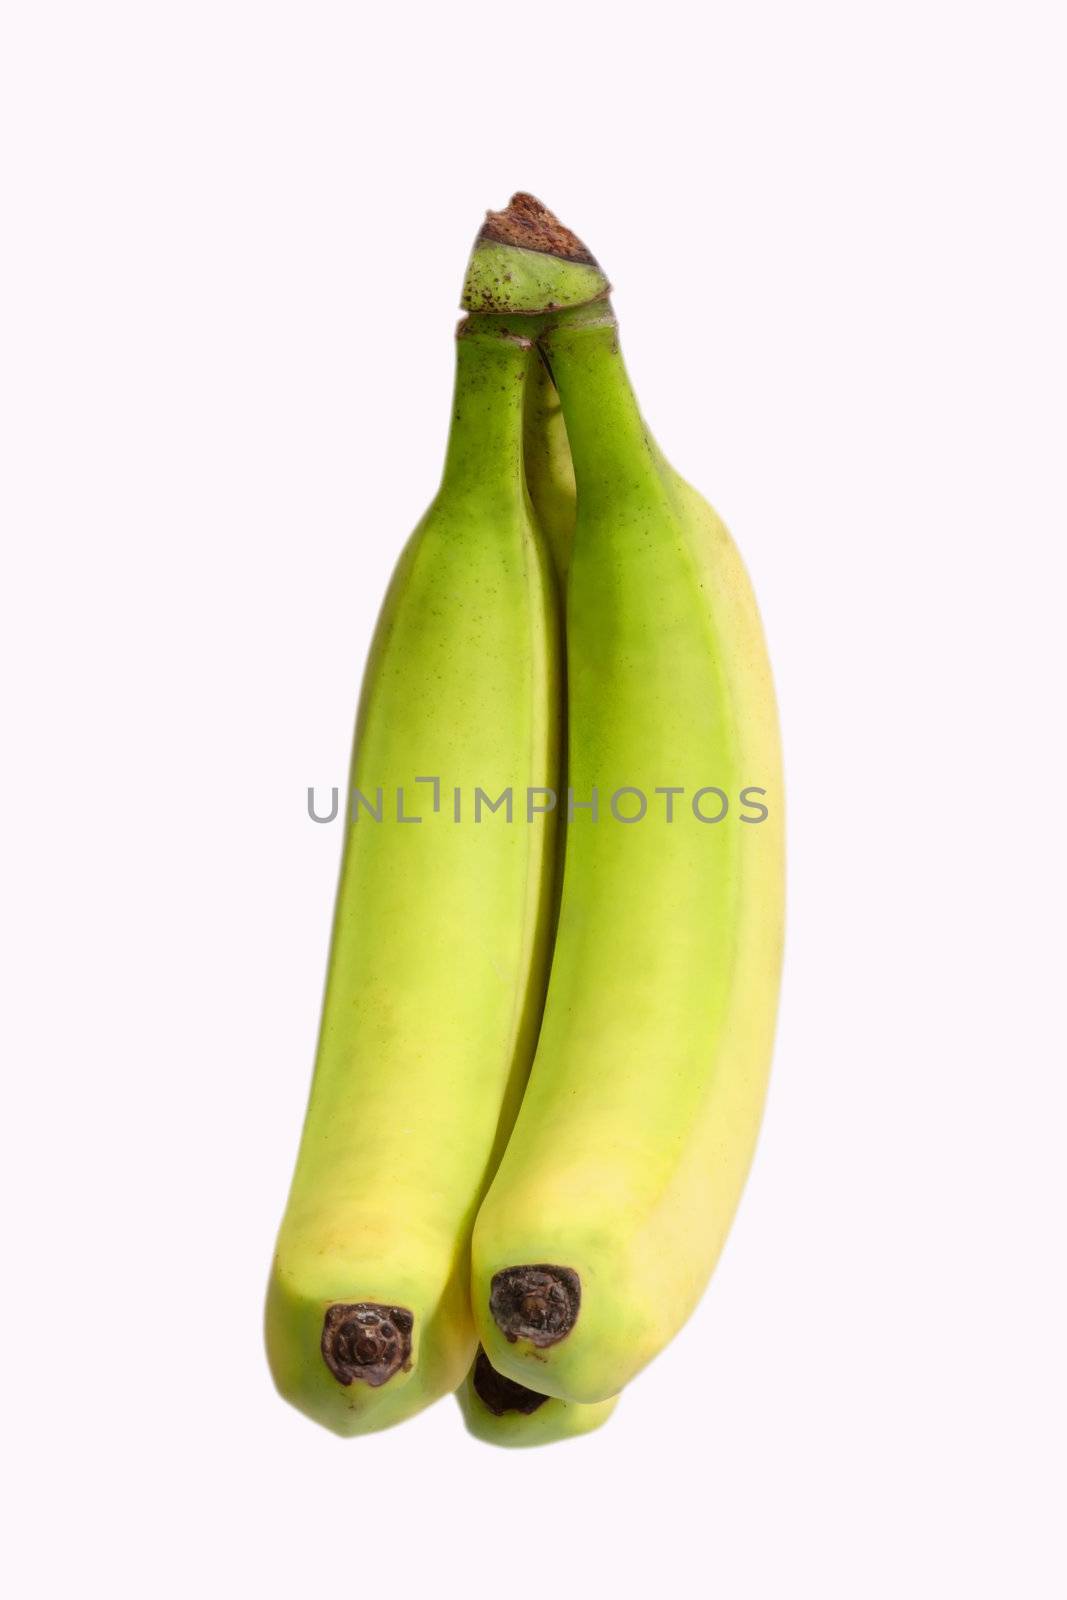 Two green unripe bananas - isolated on white background